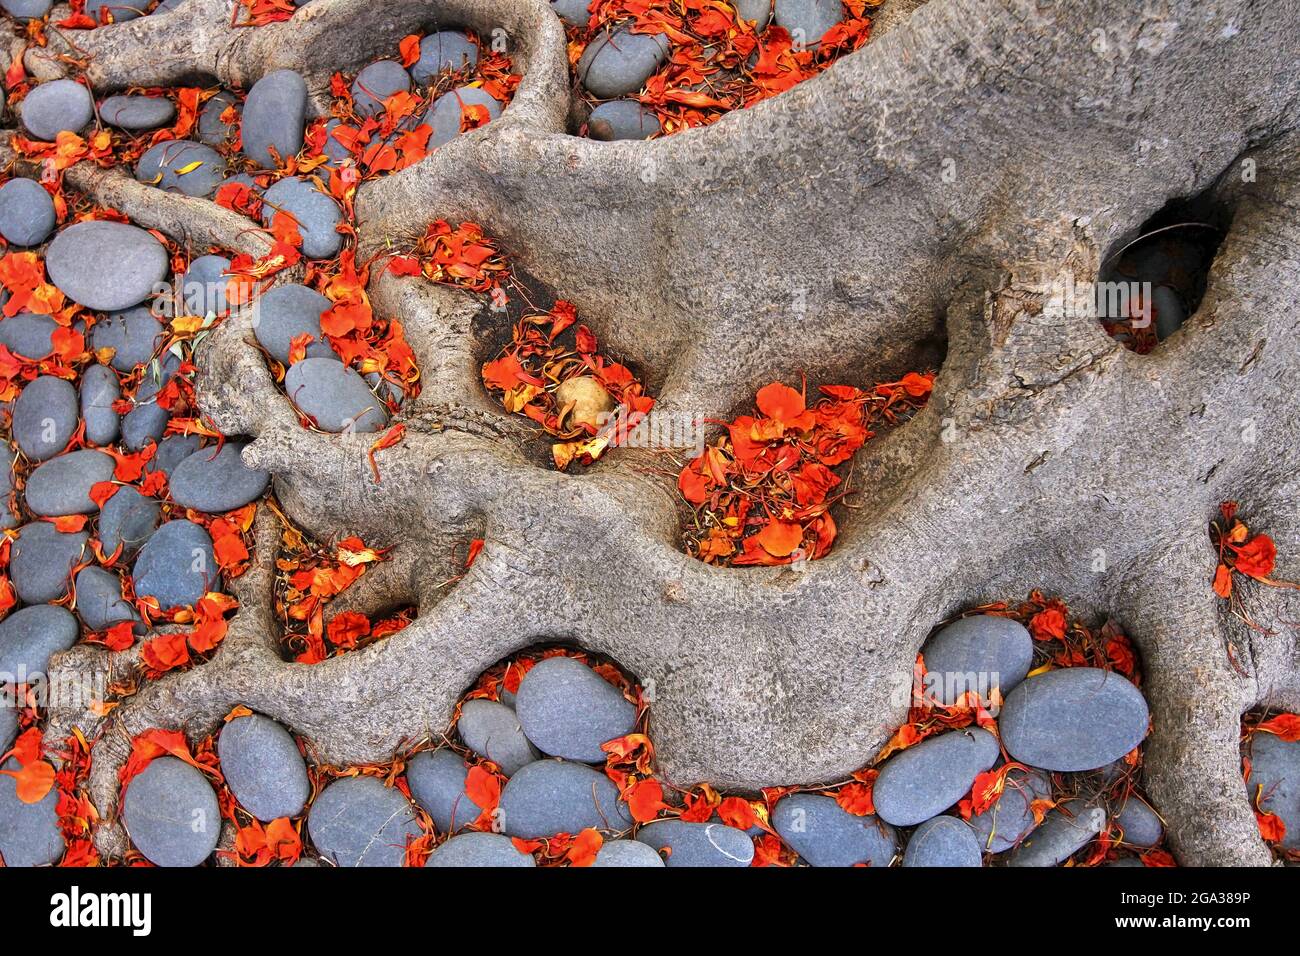 Red leaves among stones and tree roots on the ground; Key West, Florida, United States of America Stock Photo